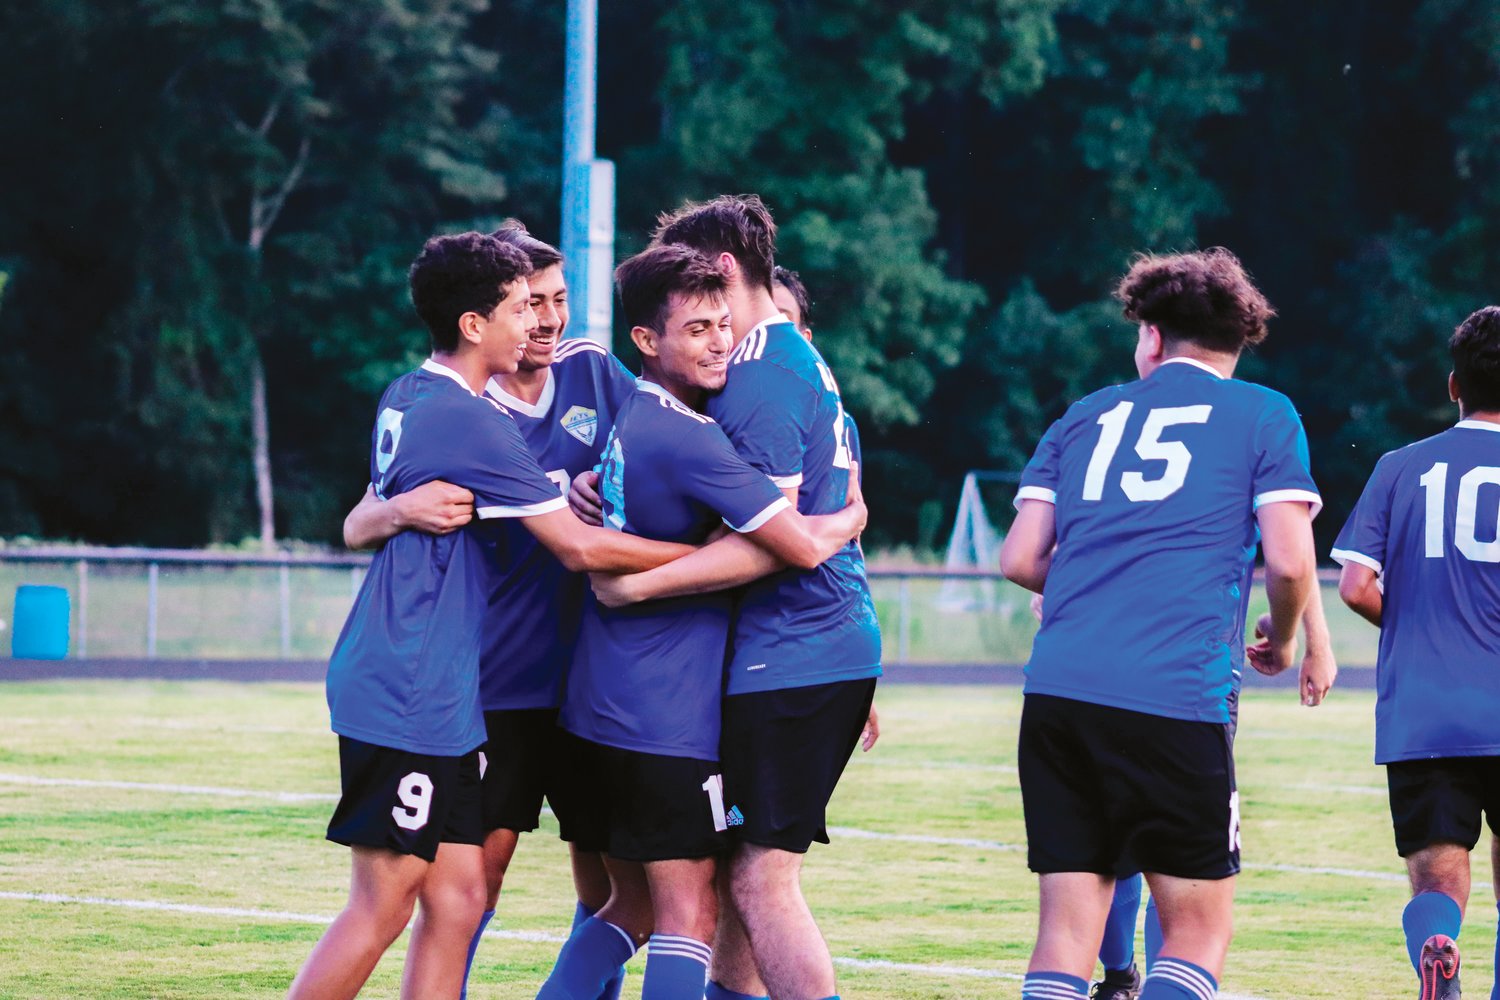 Jordan-Matthews players celebrate one of the team's goals in the Jets' 4-1 season-opening win over Northwood last Thursday in Siler City. J-M came back from a 1-0 deficit in the first half to win.